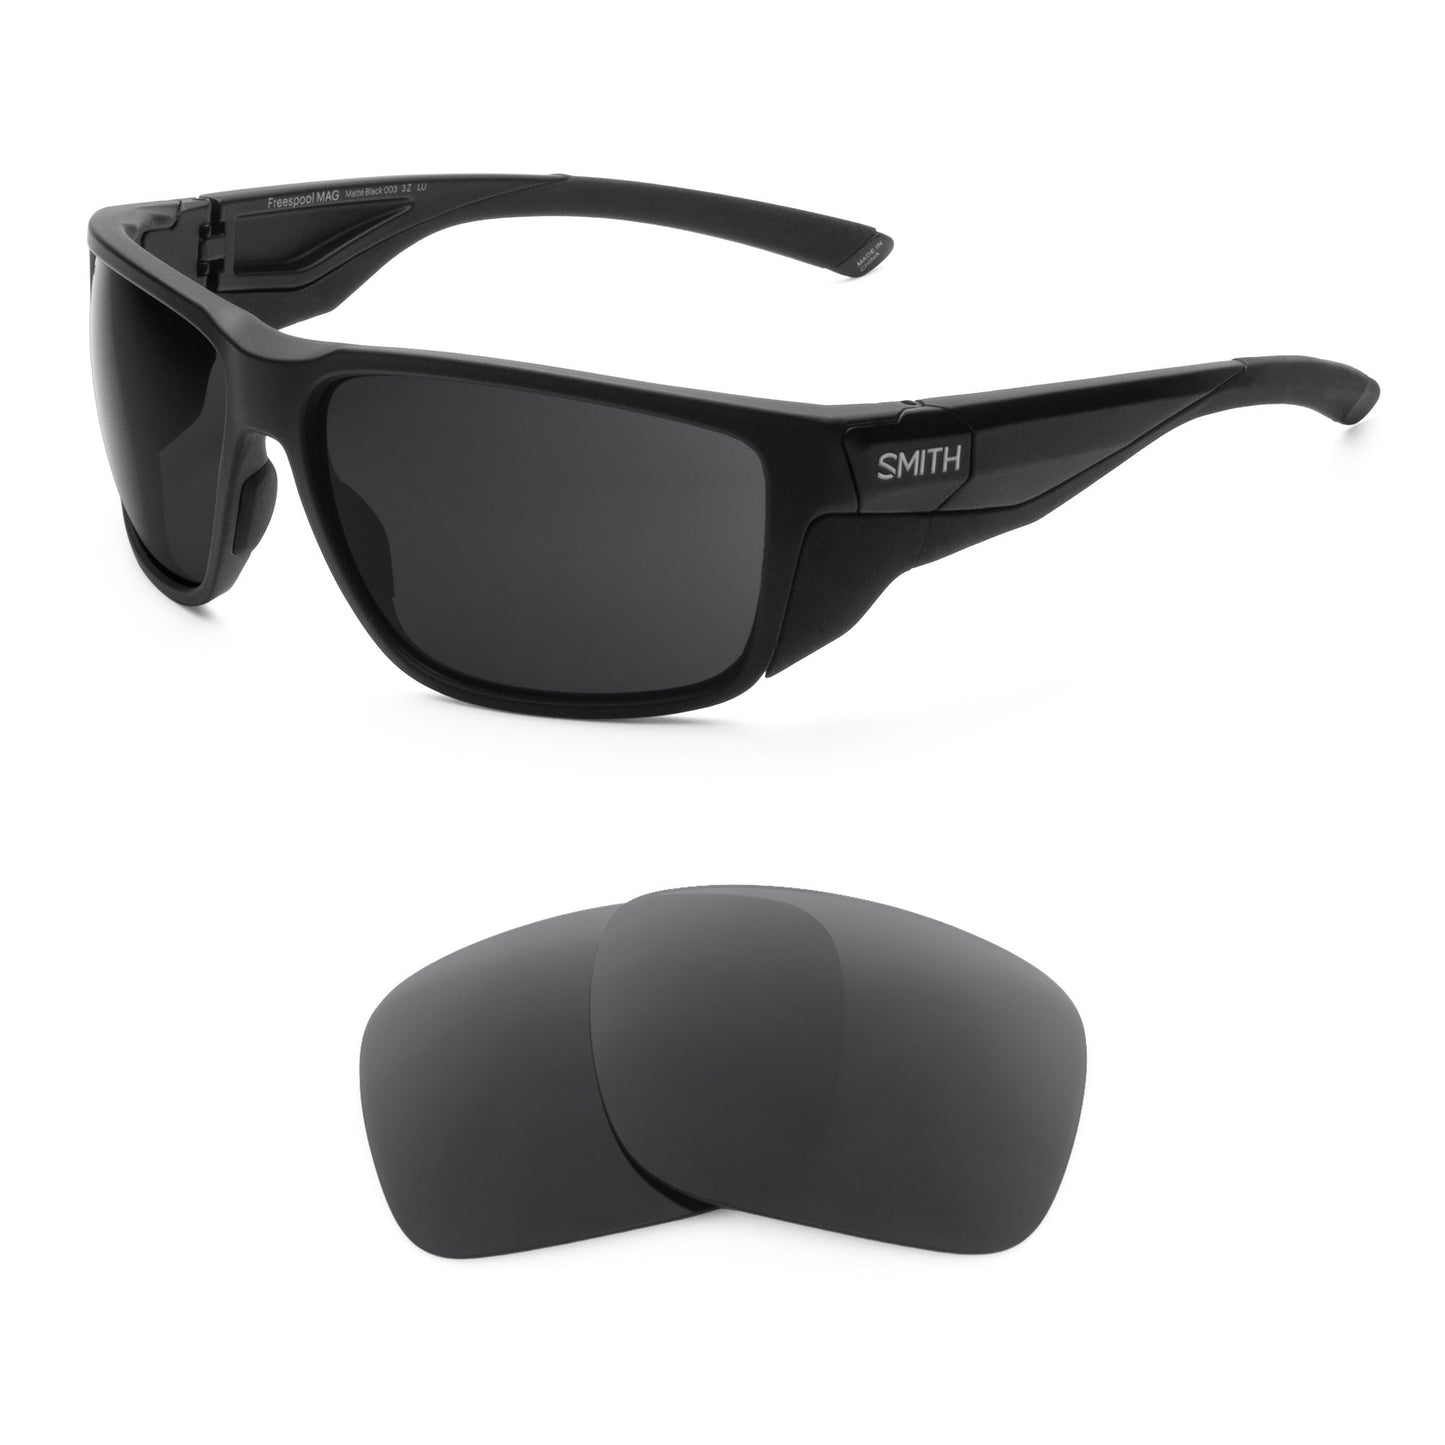 Smith Freespool MAG sunglasses with replacement lenses